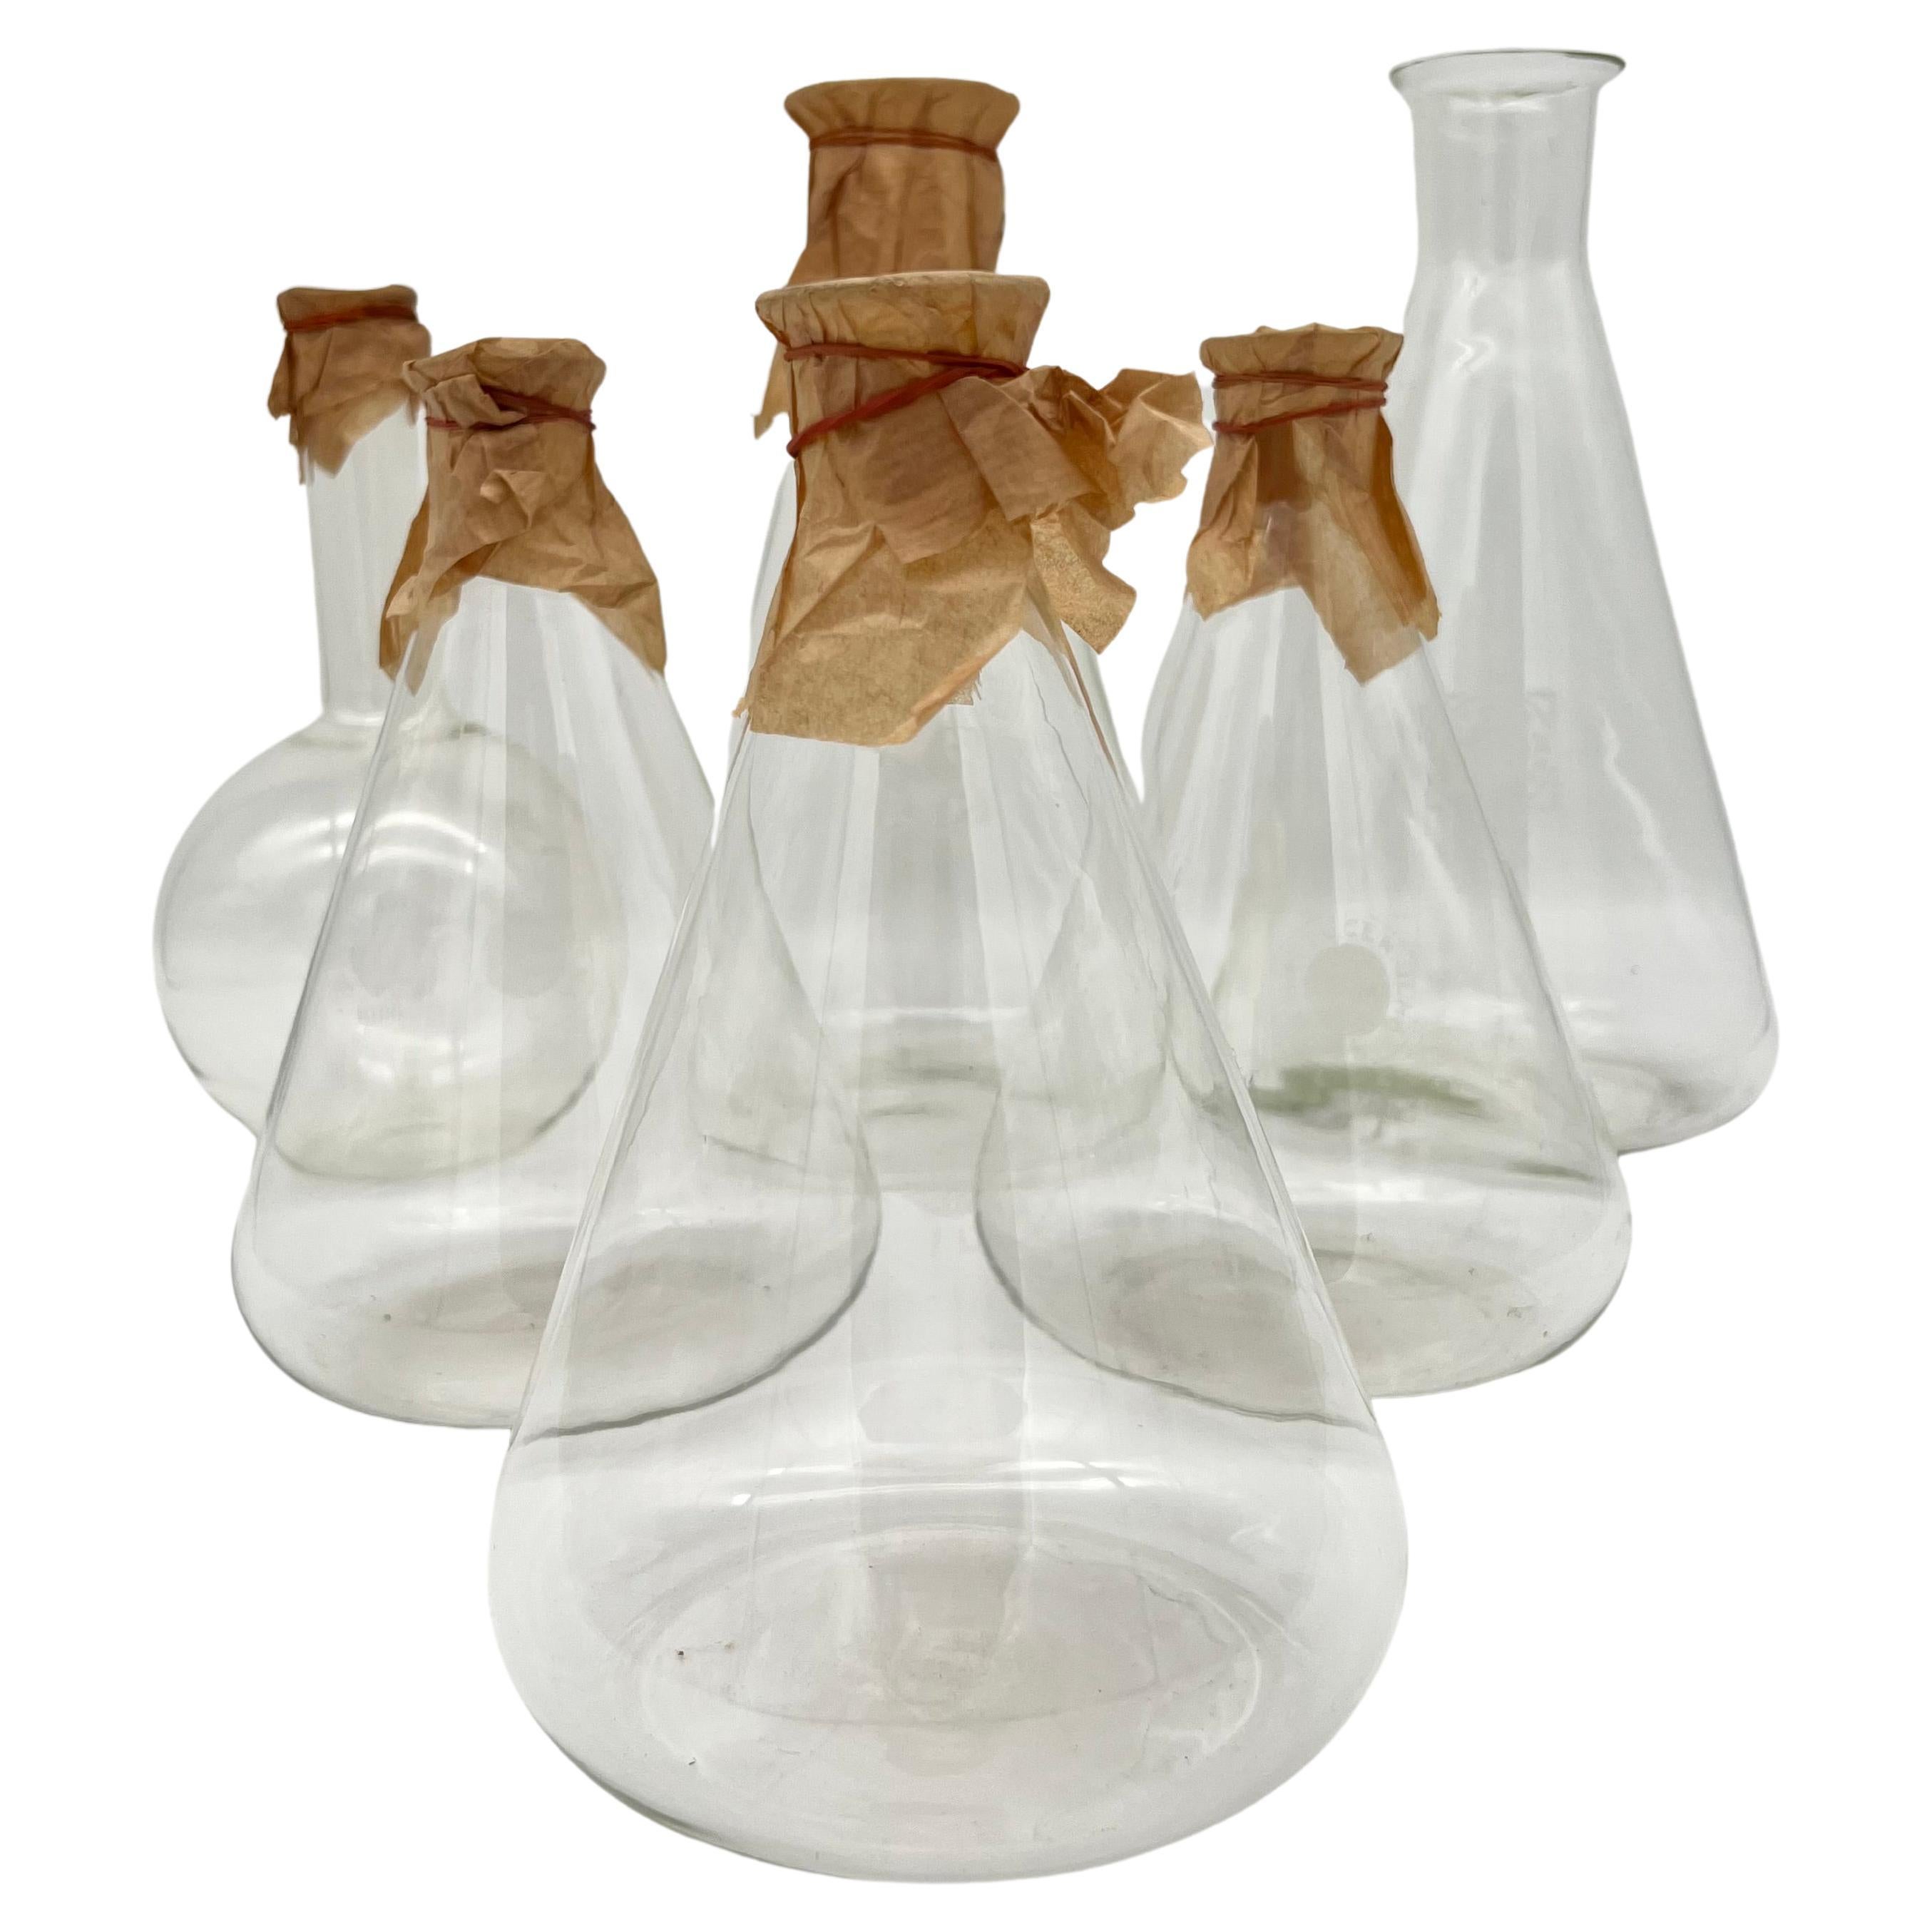 Set of Six Old Pharmacy glass bottles, made in Germany around 1900.

5 bottles from Jena (Schott and Gen Jena) and 1 Wirag laboratory glass. 
The logo and volume are etched on all bottles.

Can be used as decoration, vase or in the home